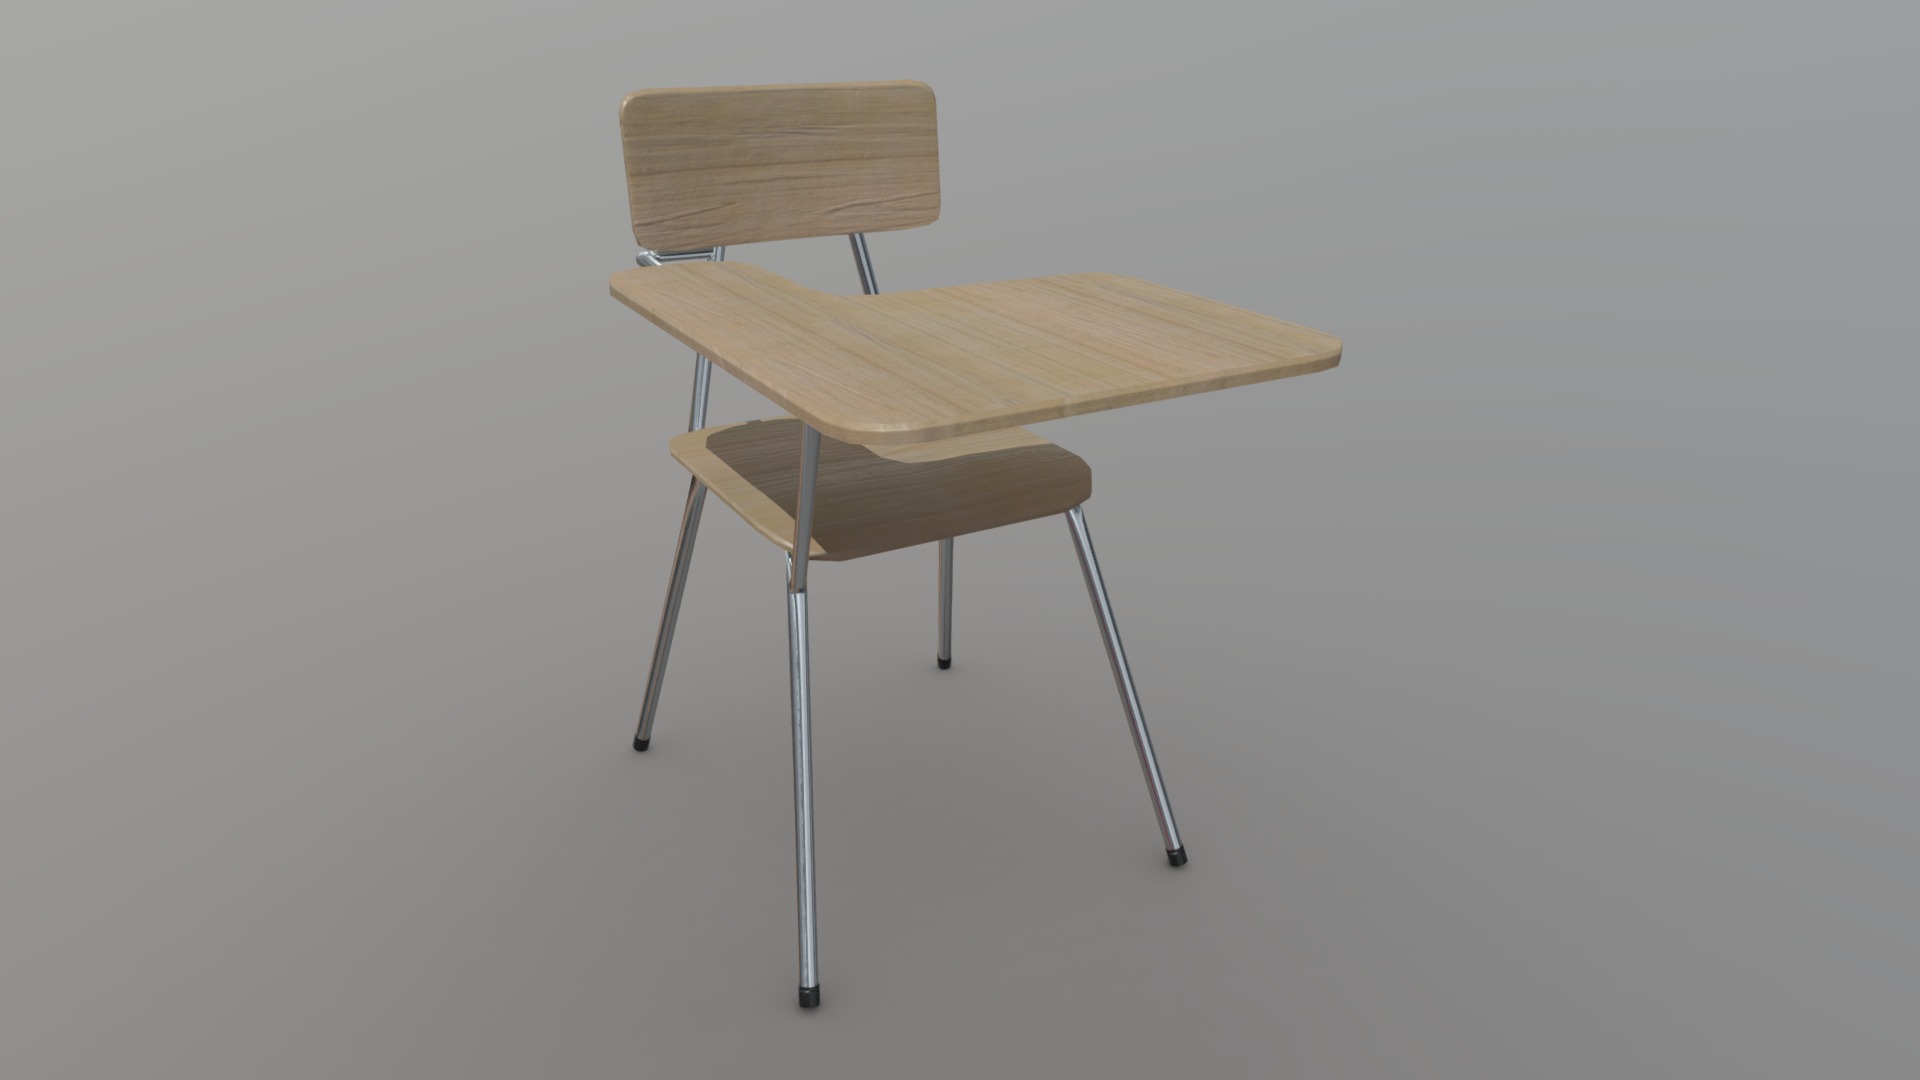 3D model School Desk - This is a 3D model of the School Desk. The 3D model is about a wooden chair with a cushion.